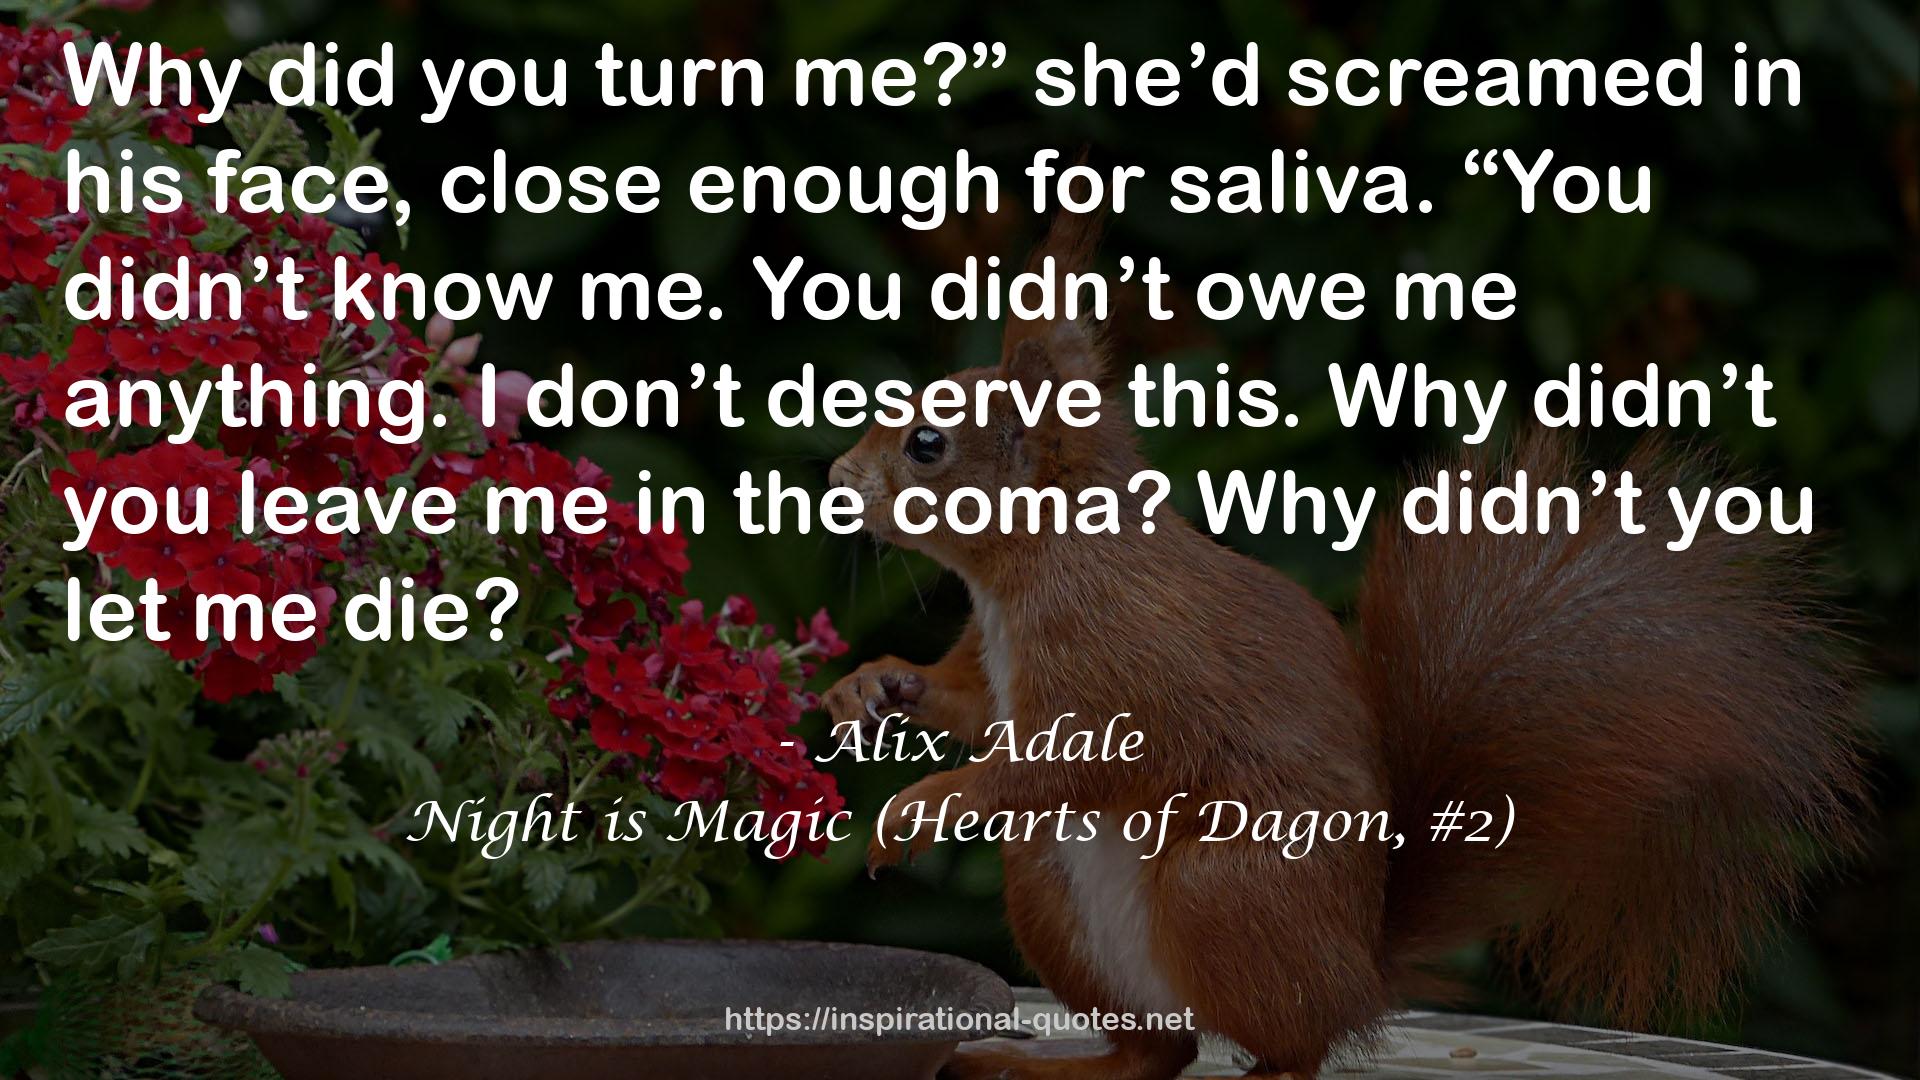 Night is Magic (Hearts of Dagon, #2) QUOTES